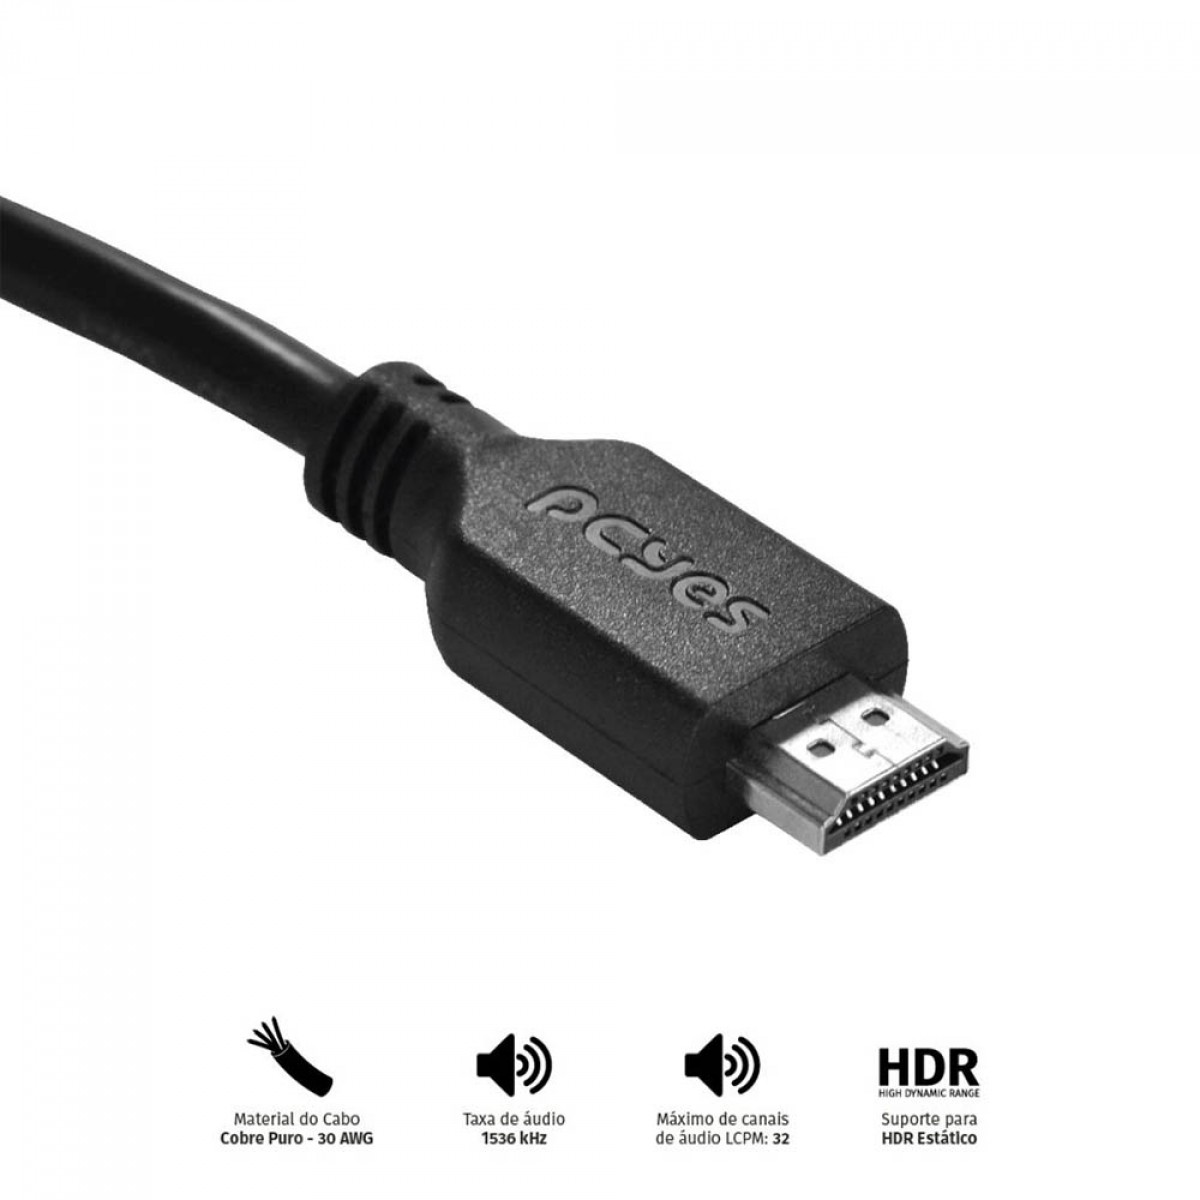 Cabo HDMI 2.0 PCYES, 4k 60Hz, 3m, PHM20-3